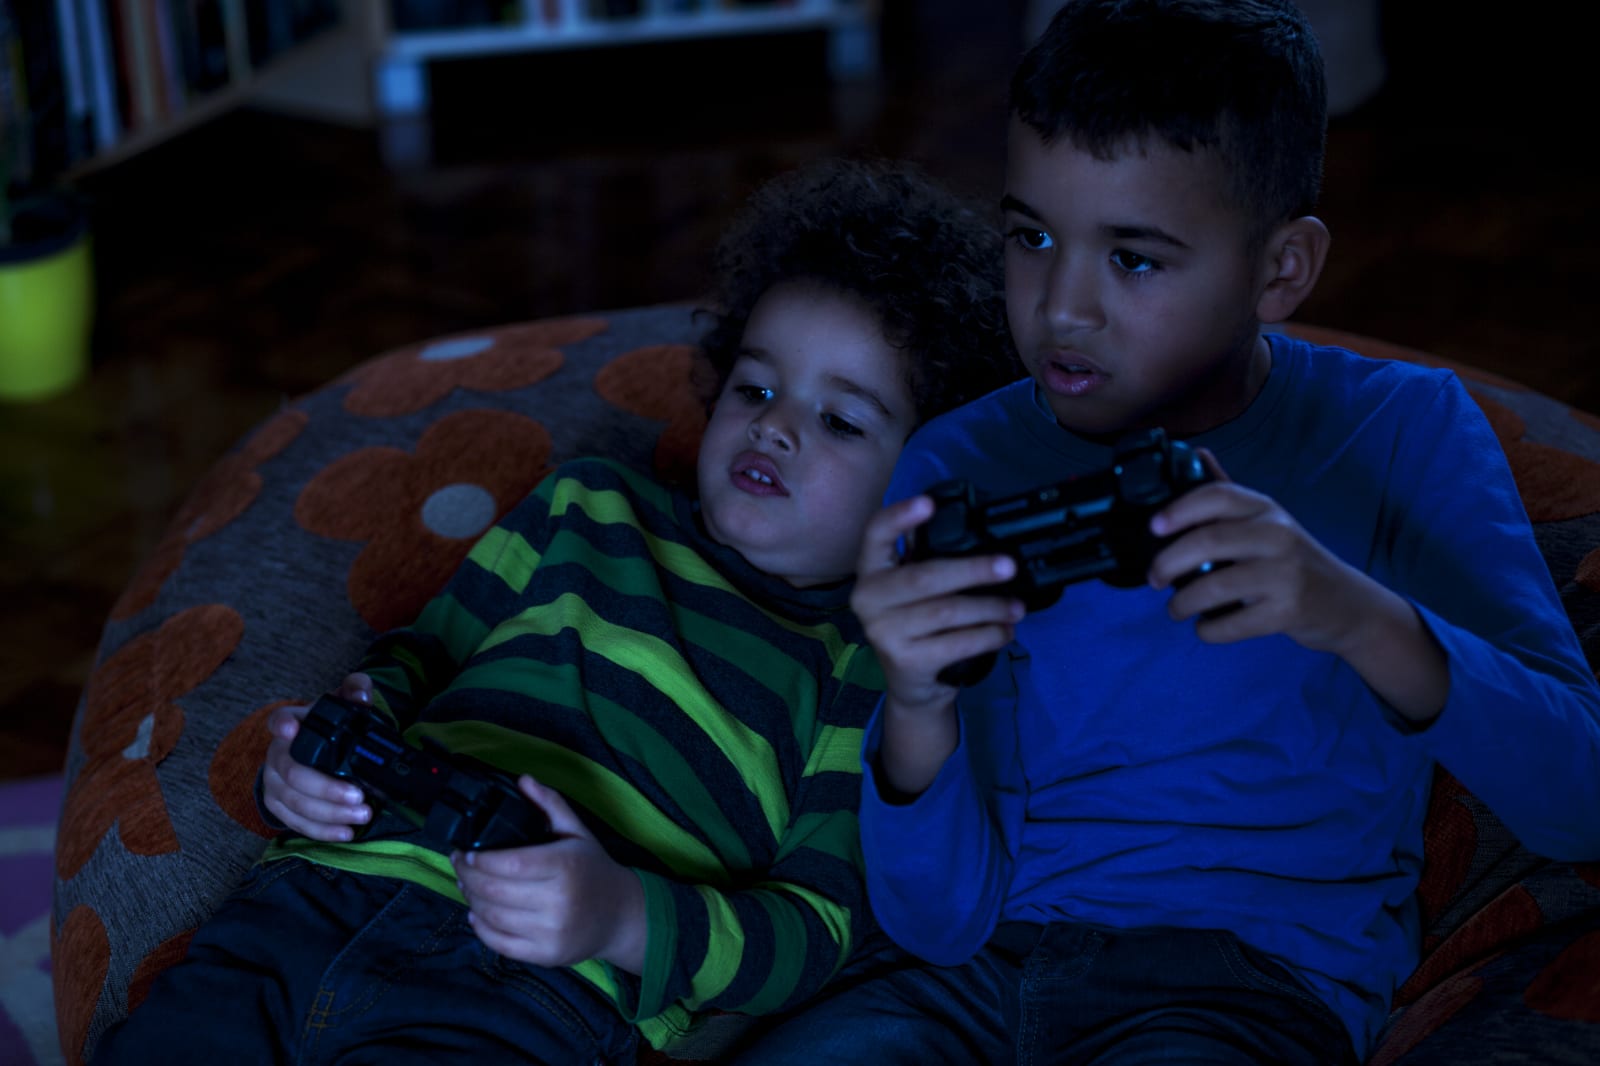 Two Friends Playing Video Game, at Night